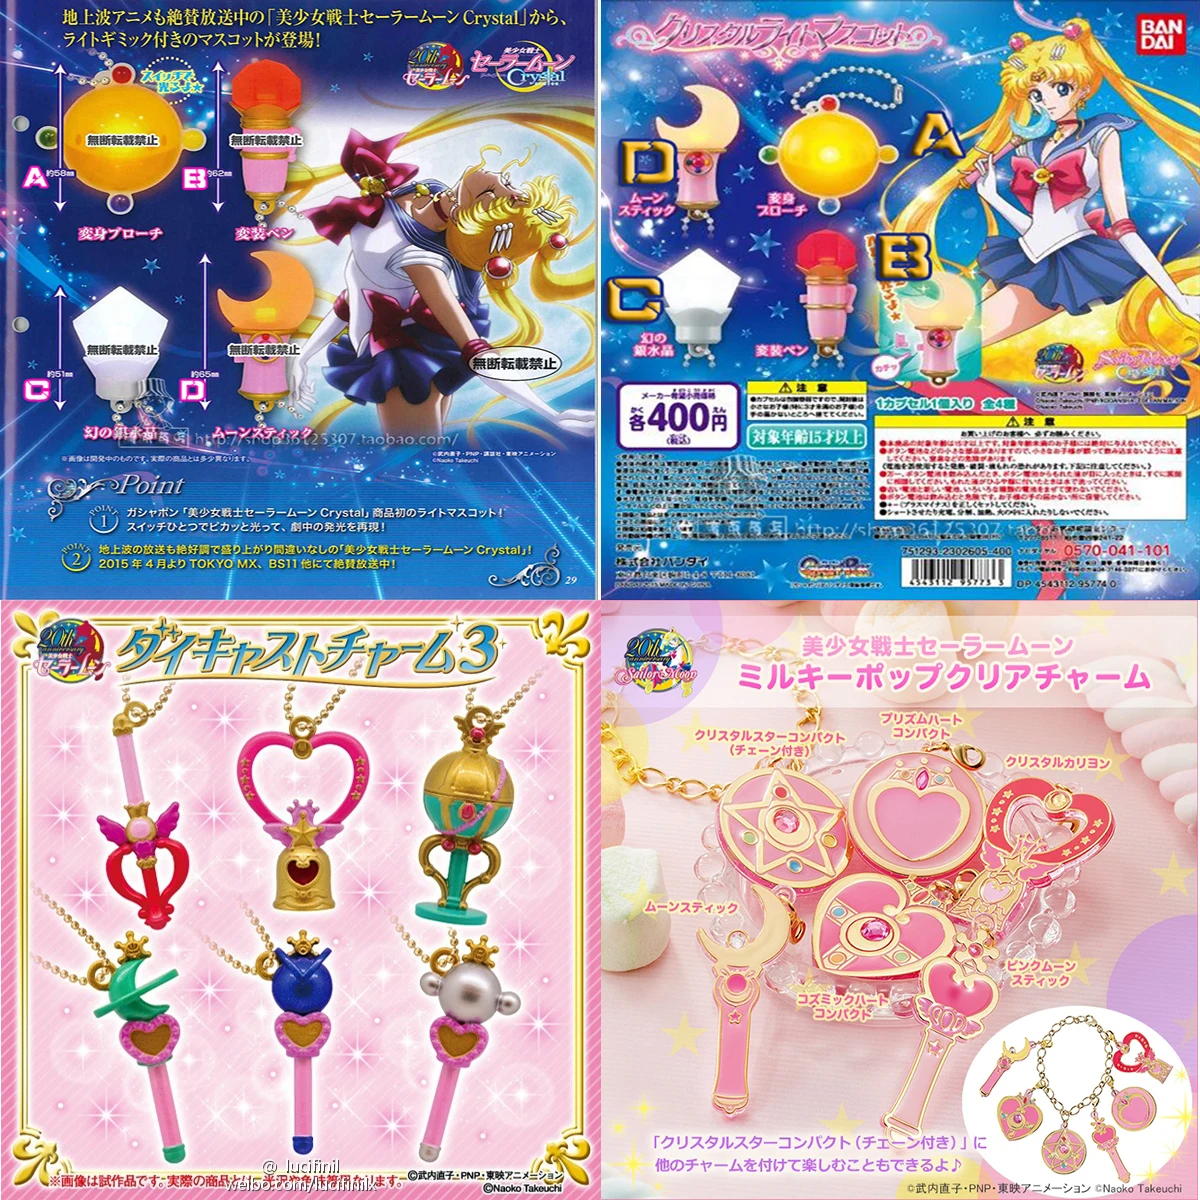 Bandai Genuine Sailor Moon Gashapon Toys Delicate Crystal Lamp Transformer Pendant Action Figure Toys Girl Gifts